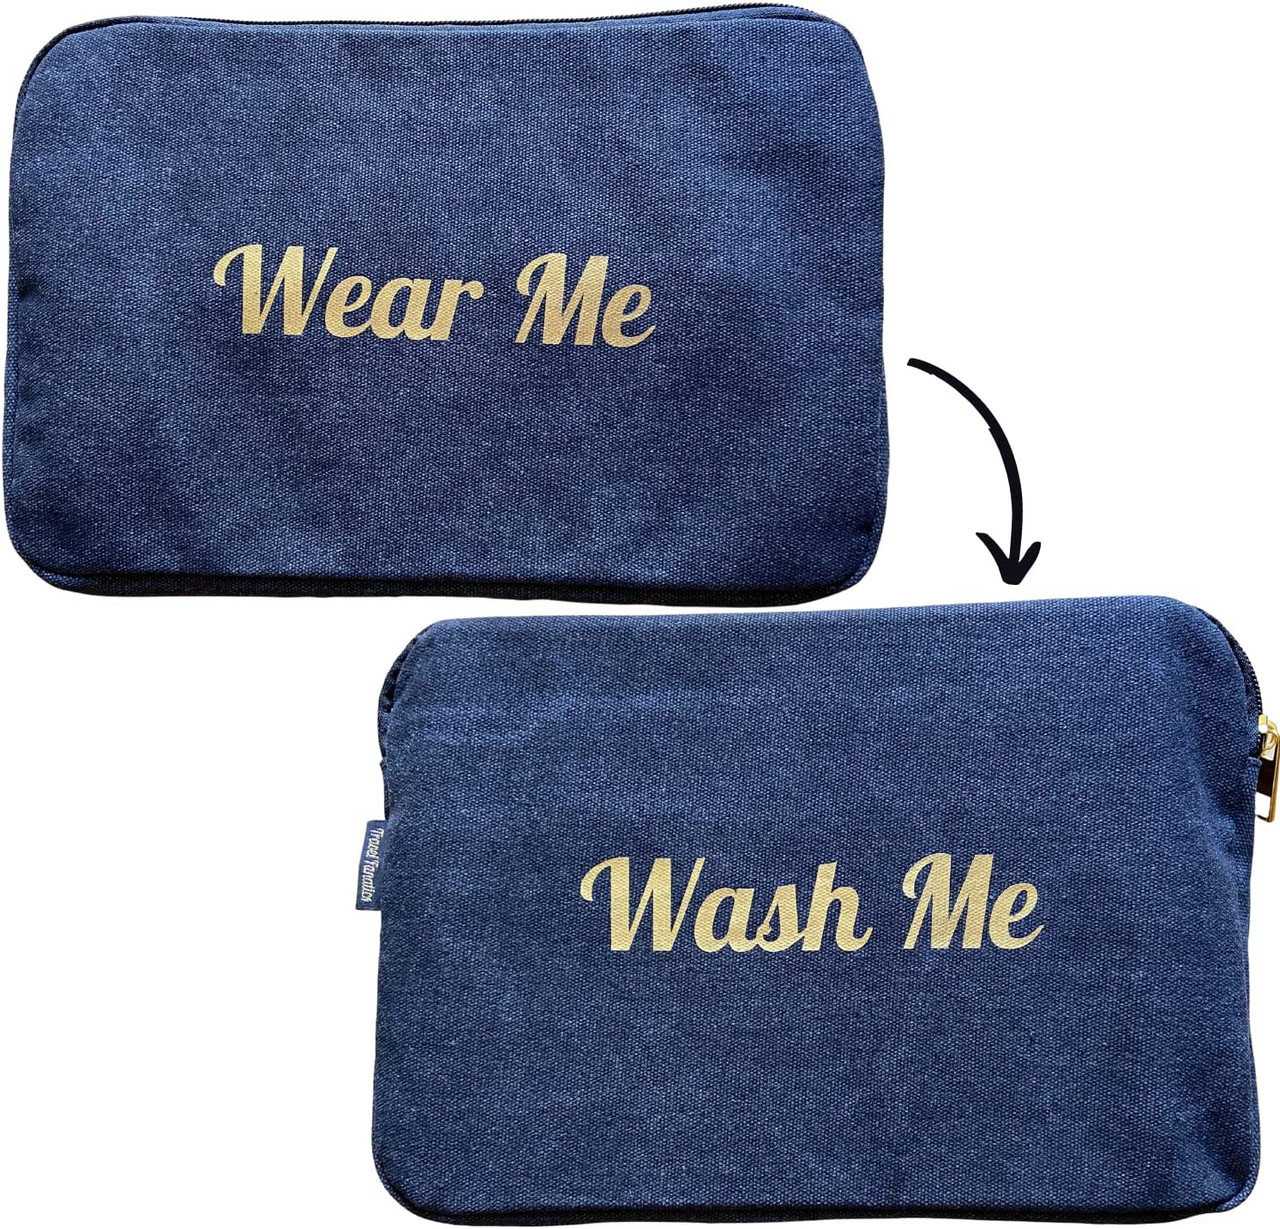  HOMEST 2 Pack XL Wash Me Travel Laundry Bag, Dirty